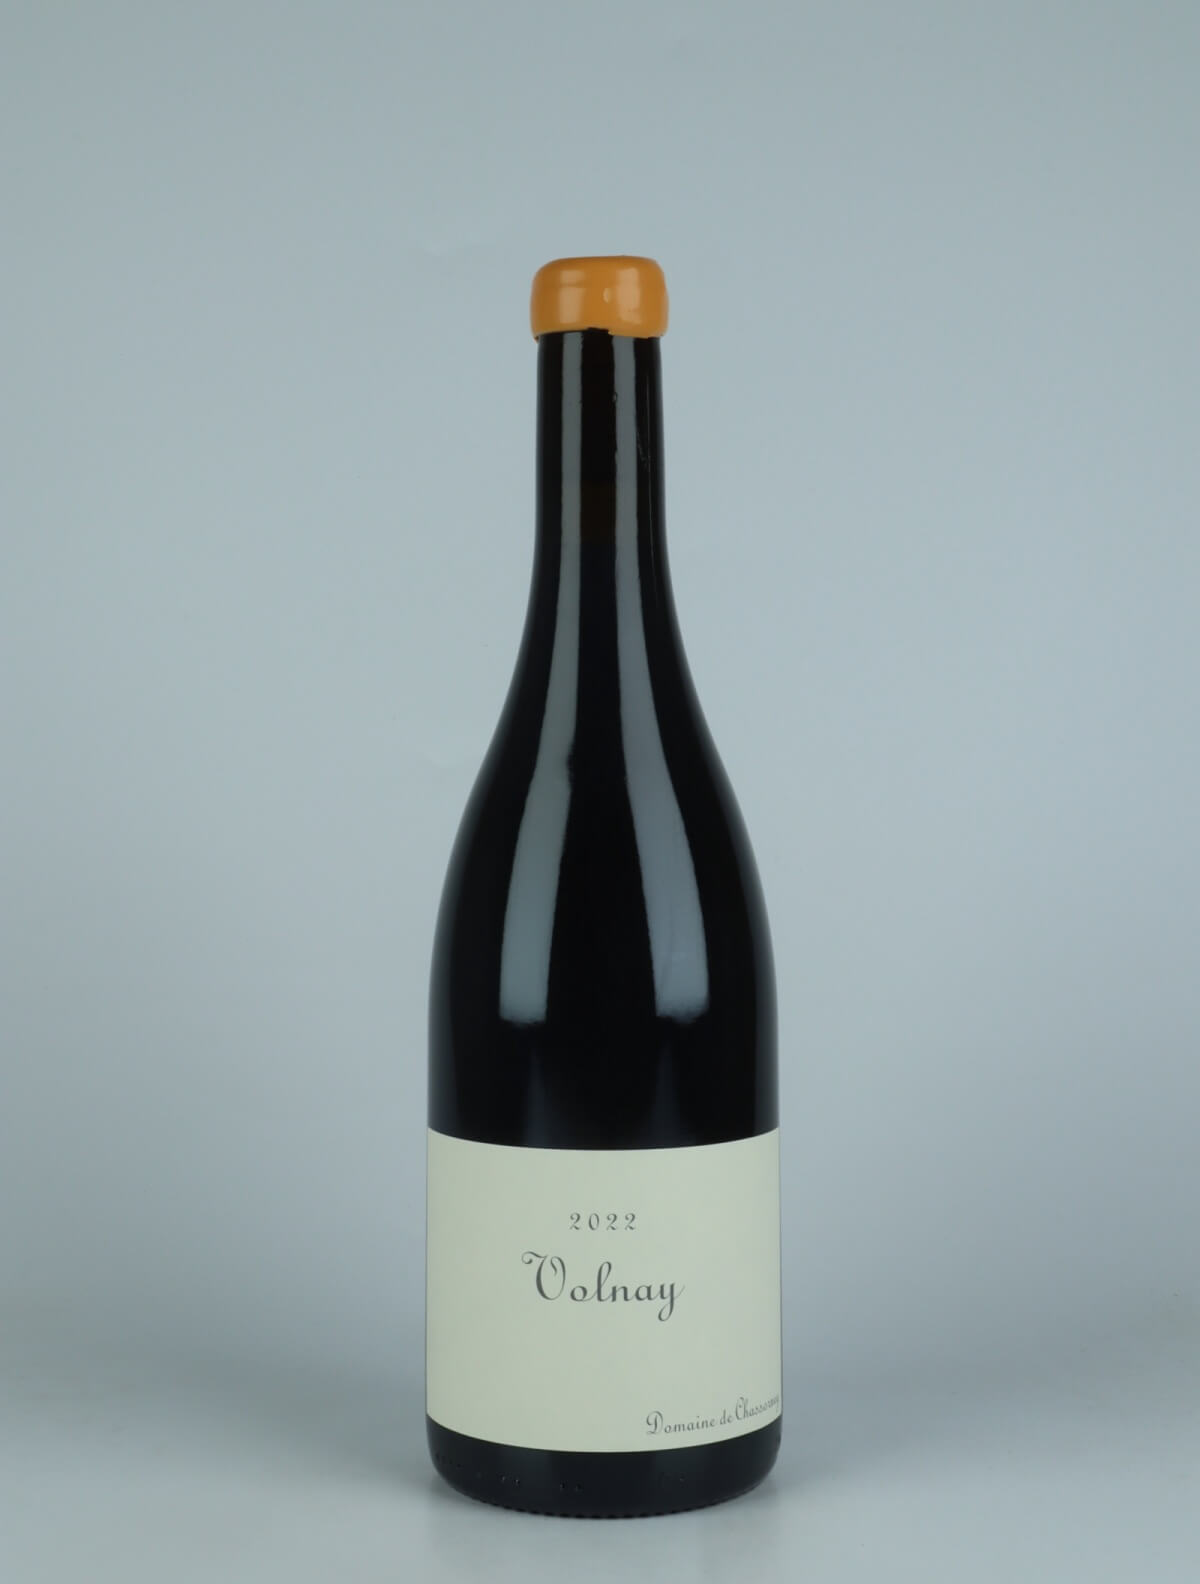 A bottle 2022 Volnay Red wine from Domaine de Chassorney, Burgundy in France